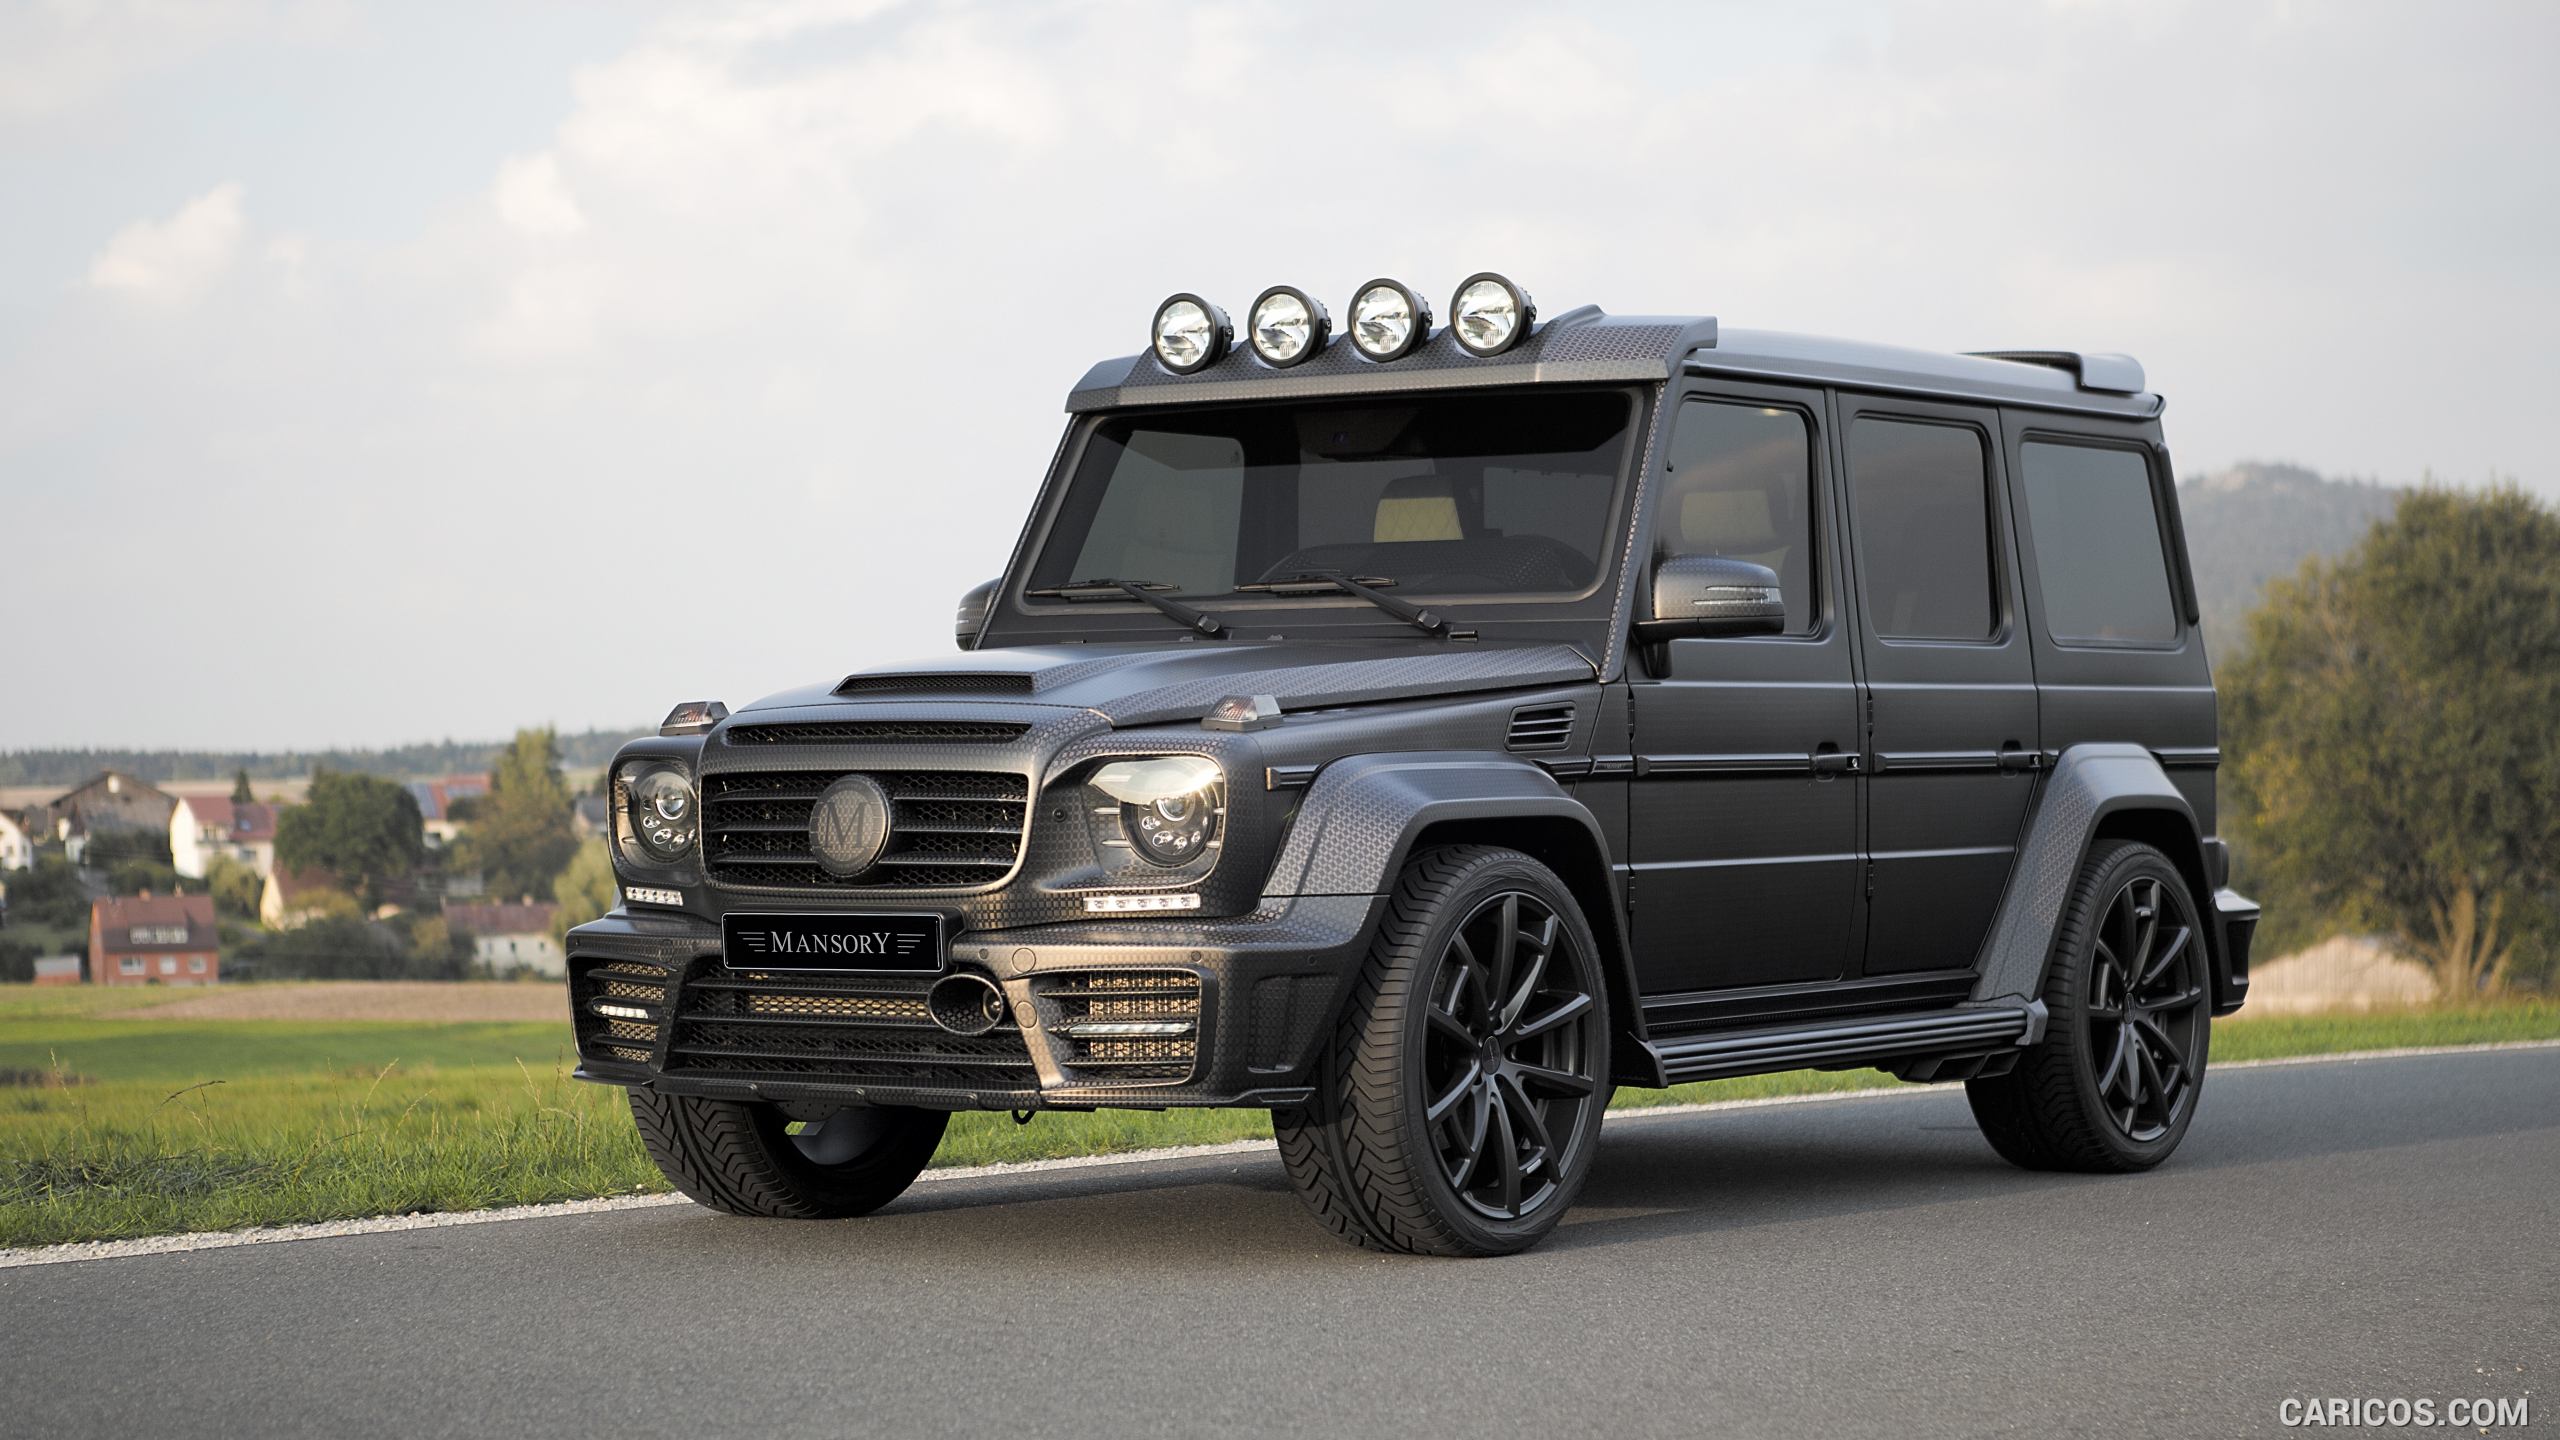 2016 MANSORY GRONOS Black Edition based on Mercedes G63 AMG - Front, #4 of 16